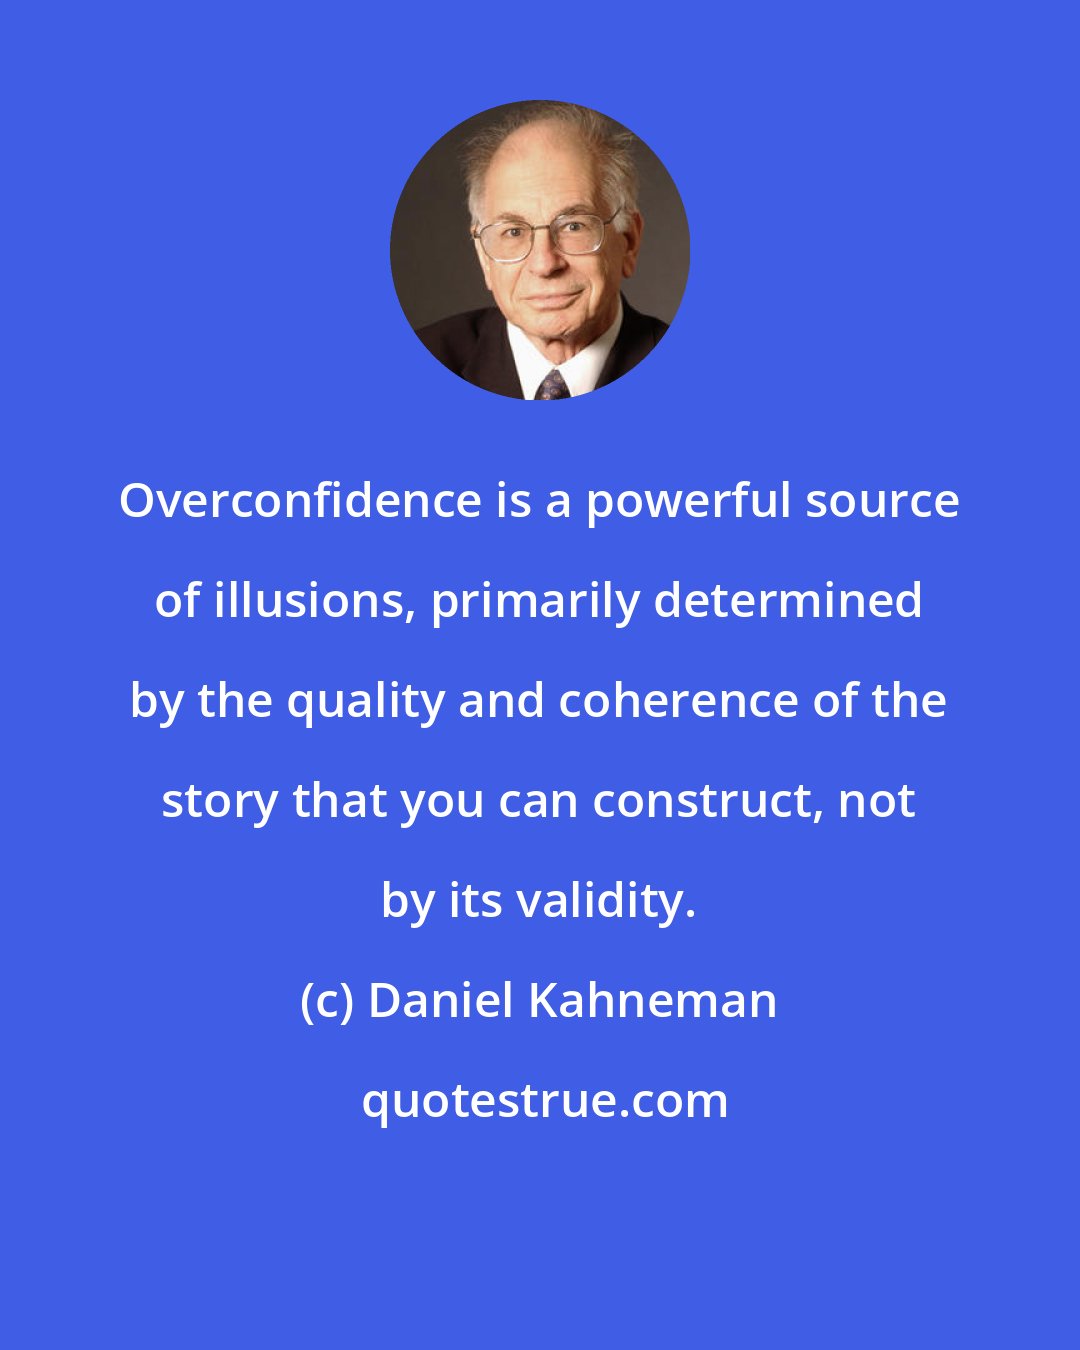 Daniel Kahneman: Overconfidence is a powerful source of illusions, primarily determined by the quality and coherence of the story that you can construct, not by its validity.